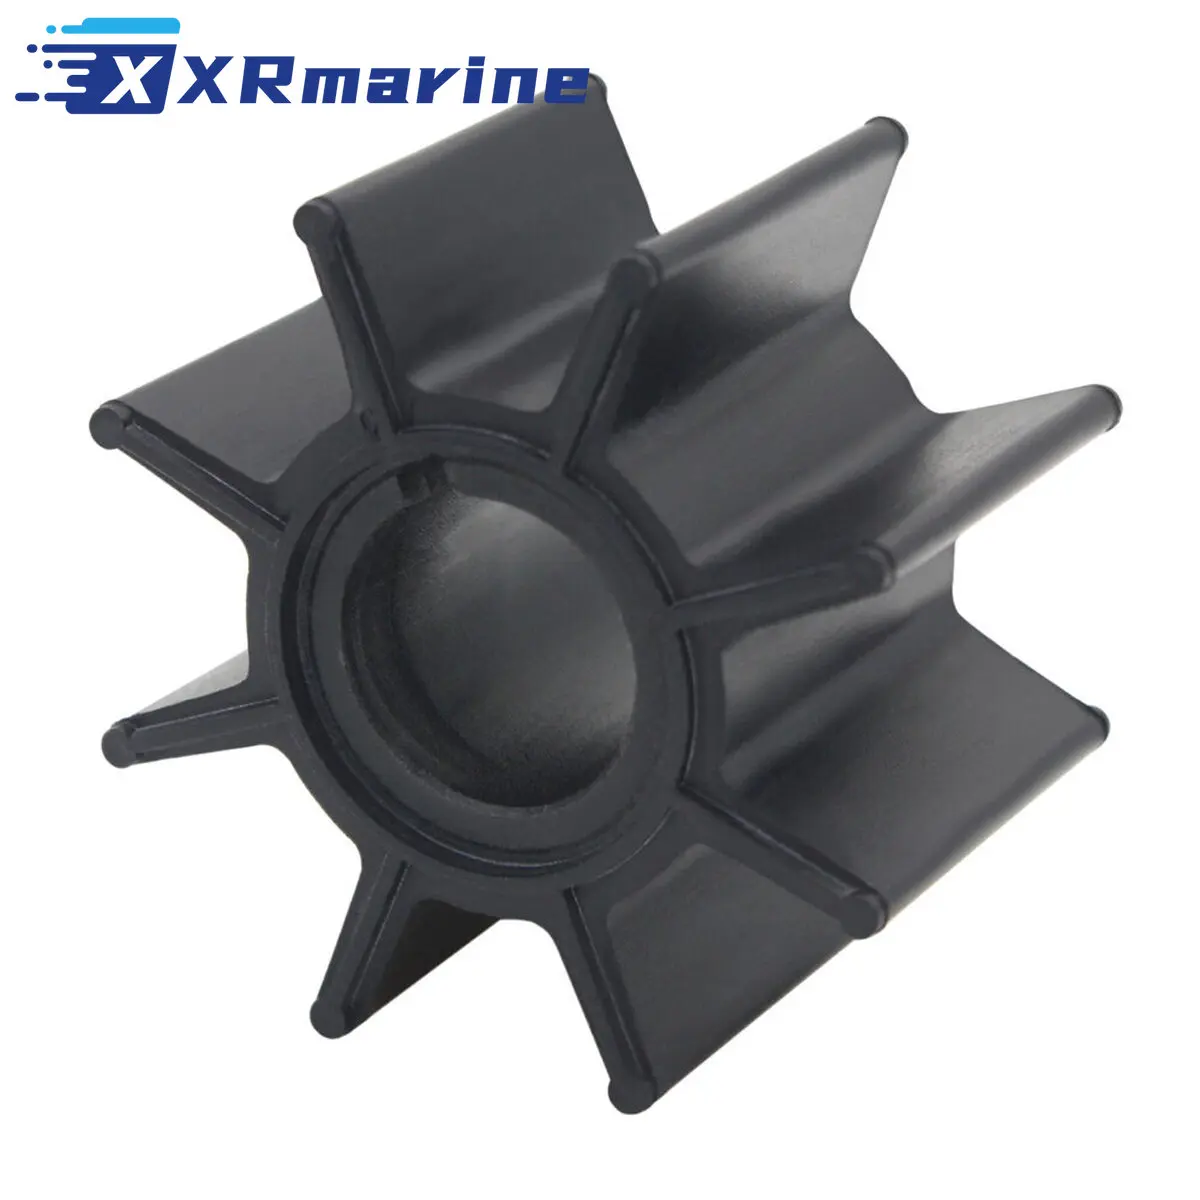 334-65021-0 Water Pump Impeller 334-65021-0M for Tohatsu Outboard Motor 334650210 9.9 15 18 20 HP 334650210M 3b2 65021 1 water pump impeller for tohatsu 2 4 stroke 6hp 8hp 9 8hp outboard motor 3b2 65021 0m 3b2 66021 0m 3b2 65021 1m